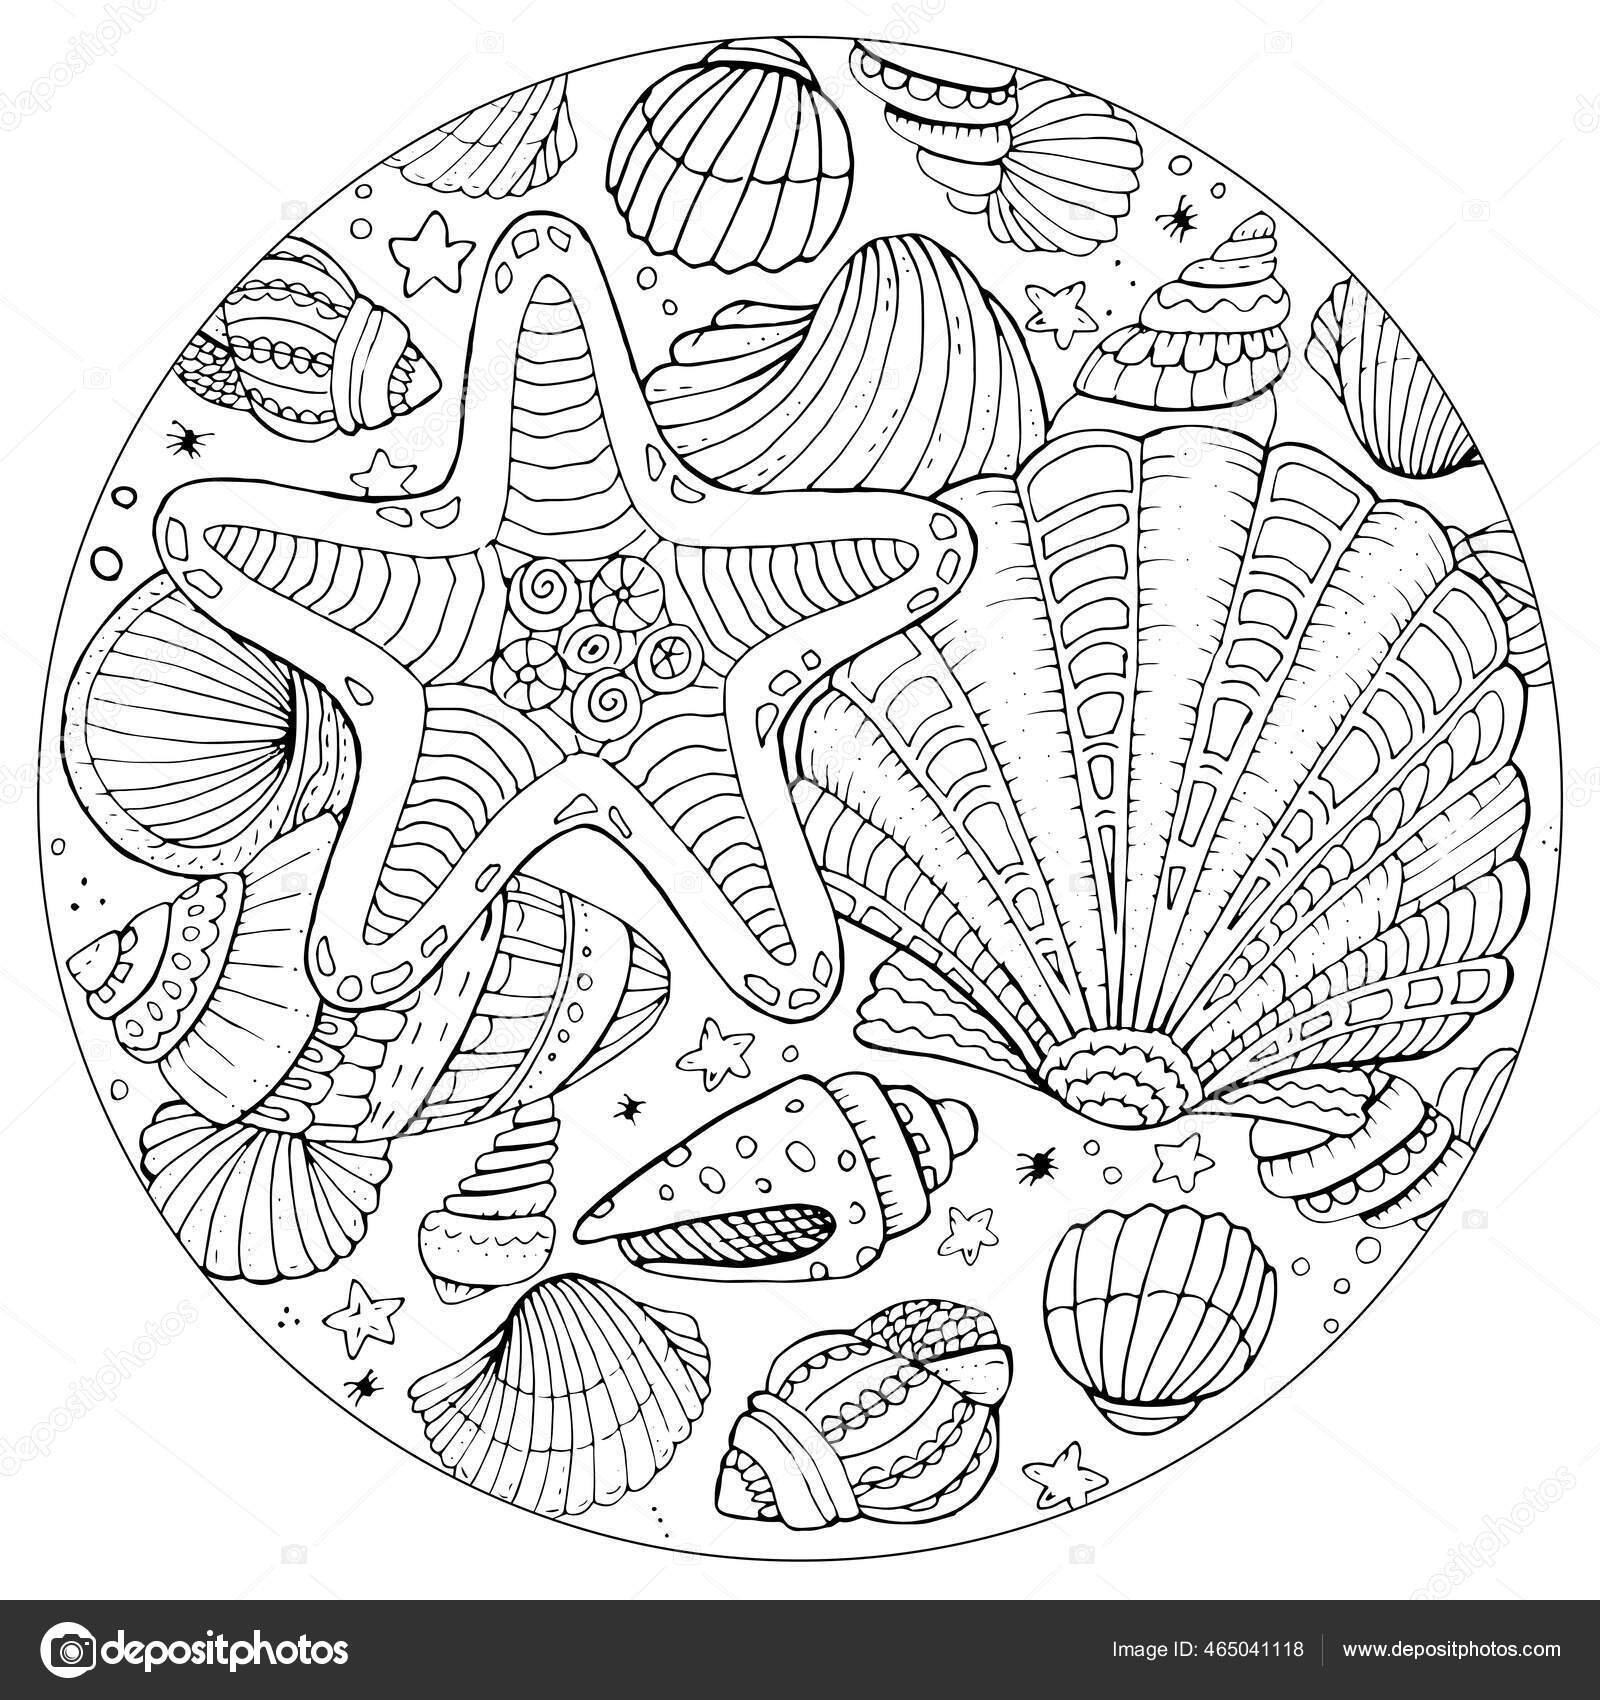 Hand drawn shape coloring page kids adults summer beach sea stock vector by christinadesigns